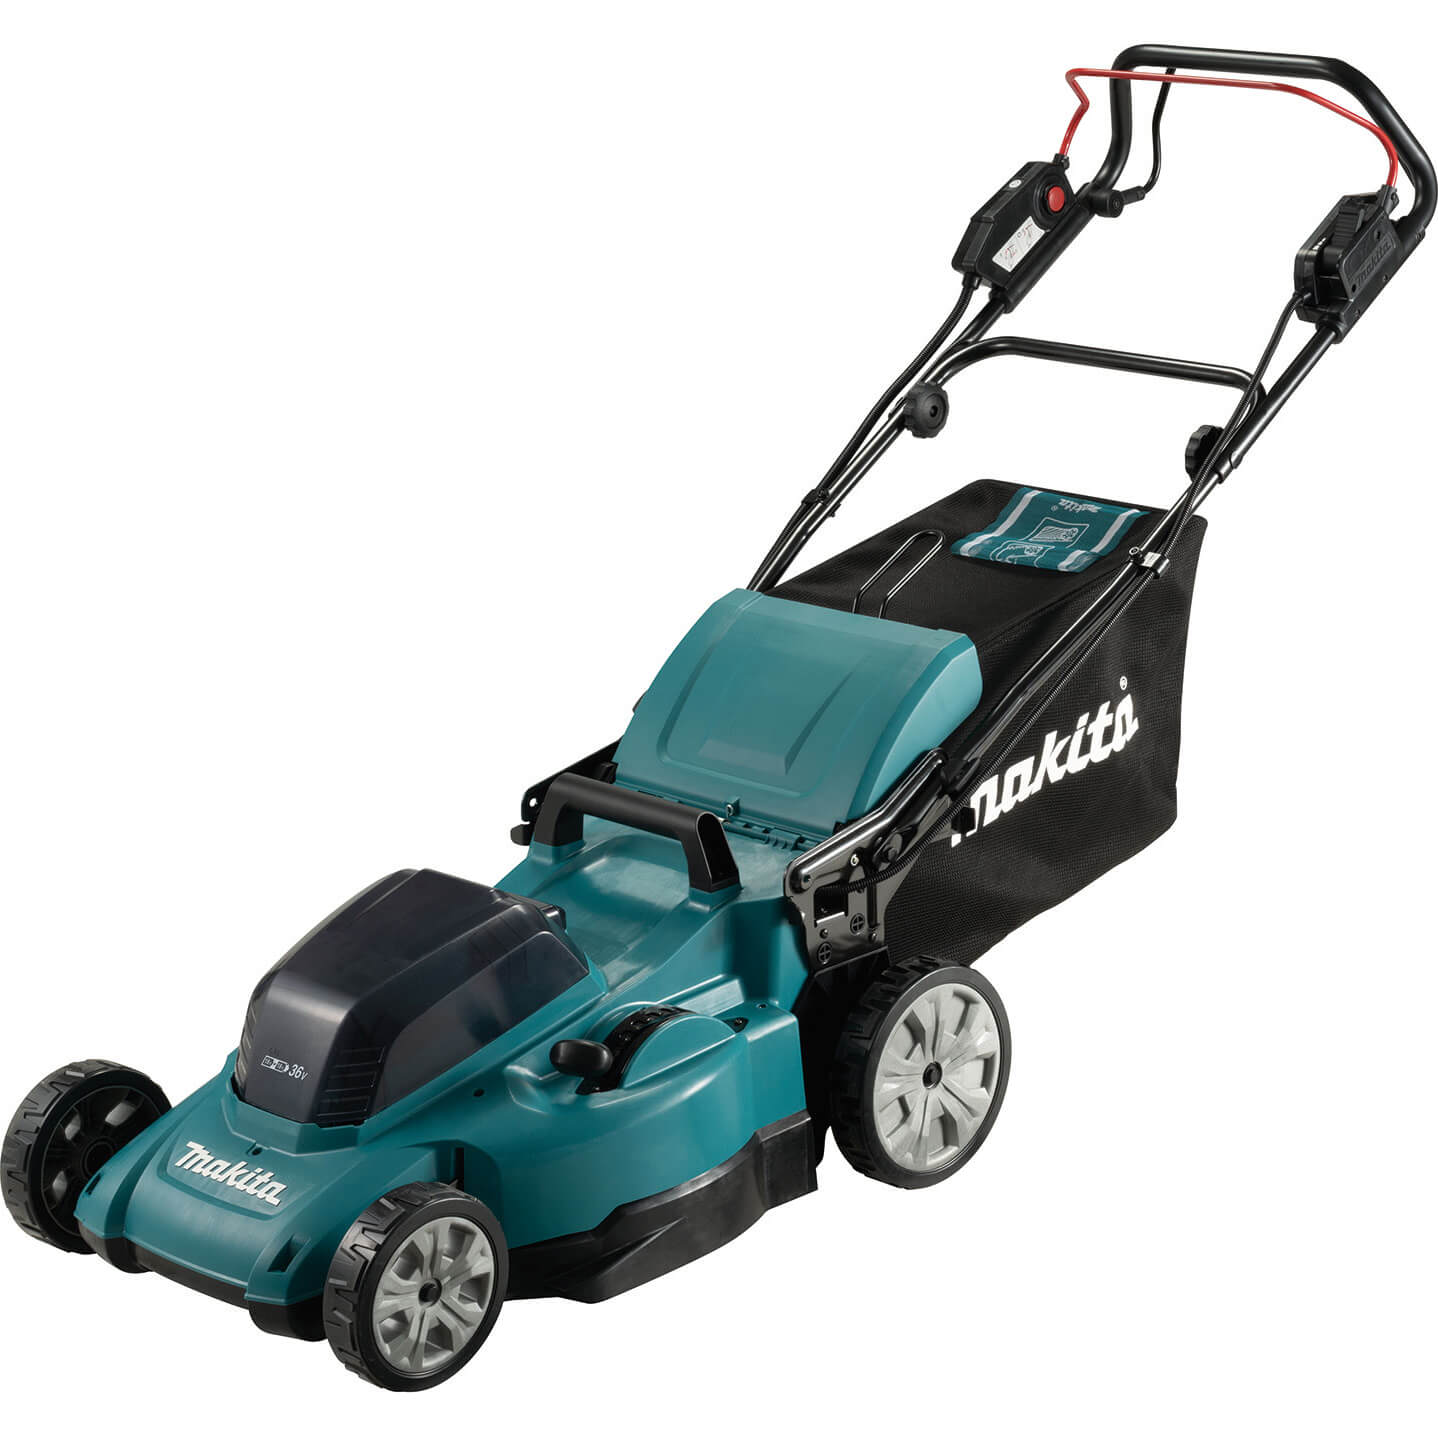 Makita DLM481 Twin 18v LXT Cordless Lawn Mower 480mm No Batteries No Charger